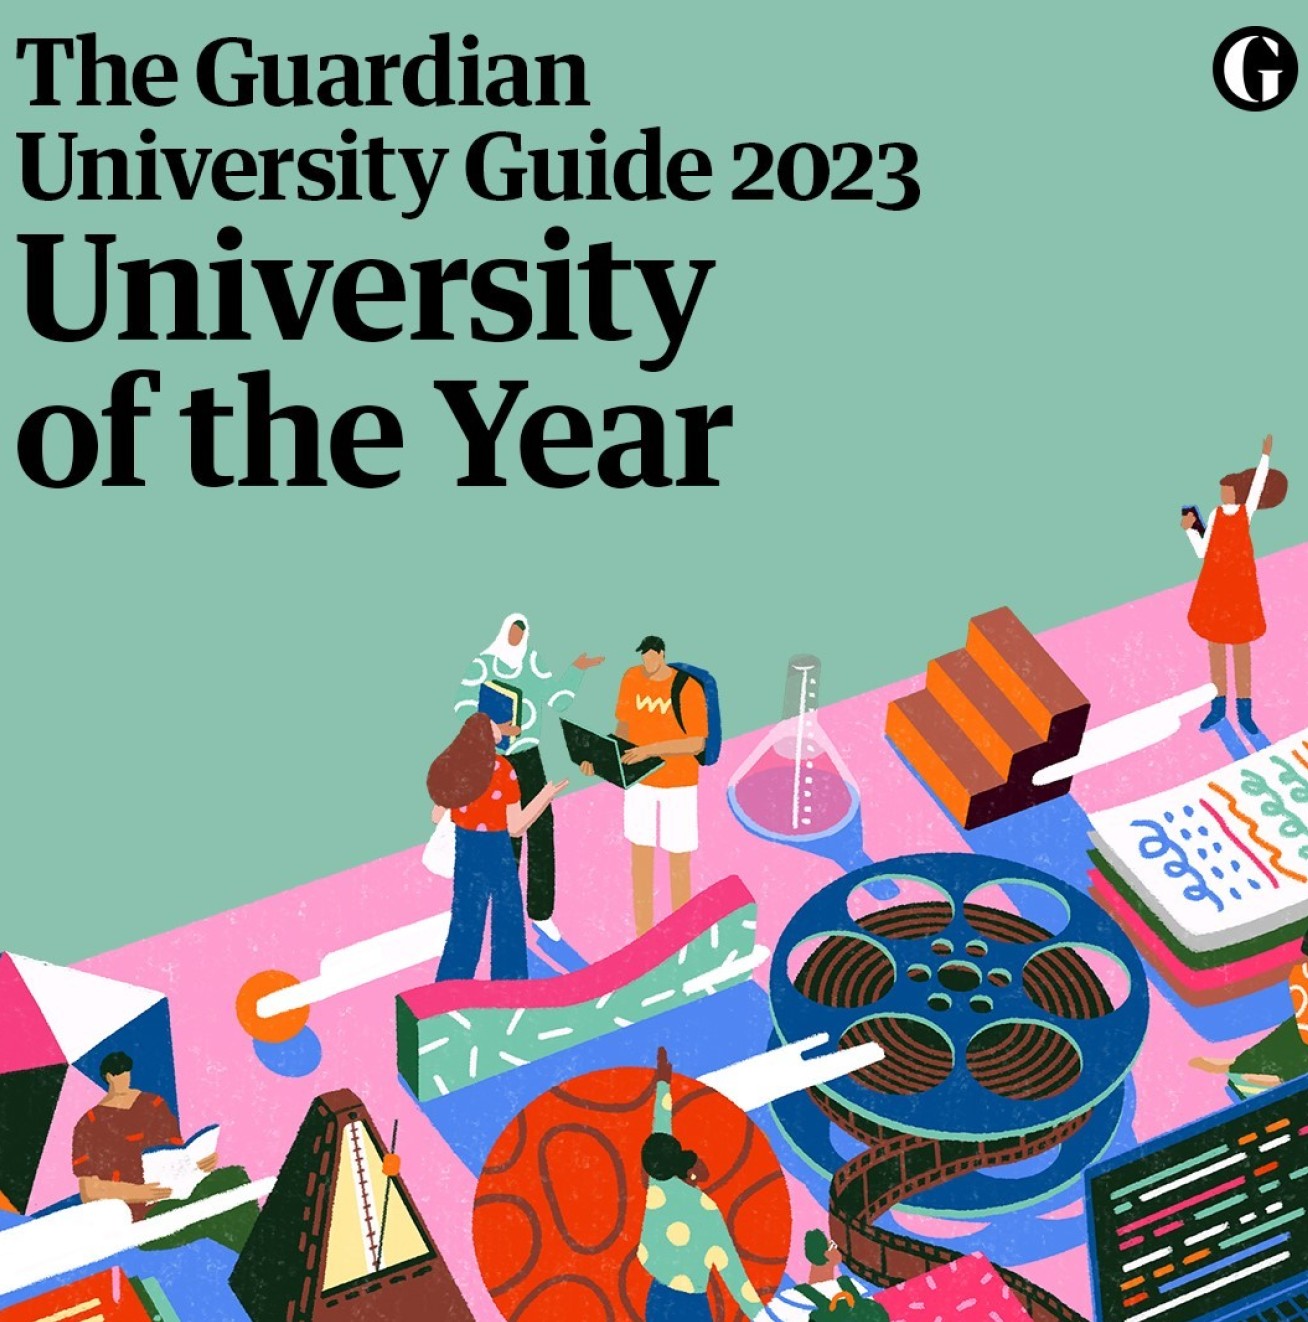 A graphic for the Guardian's University Guide 2023